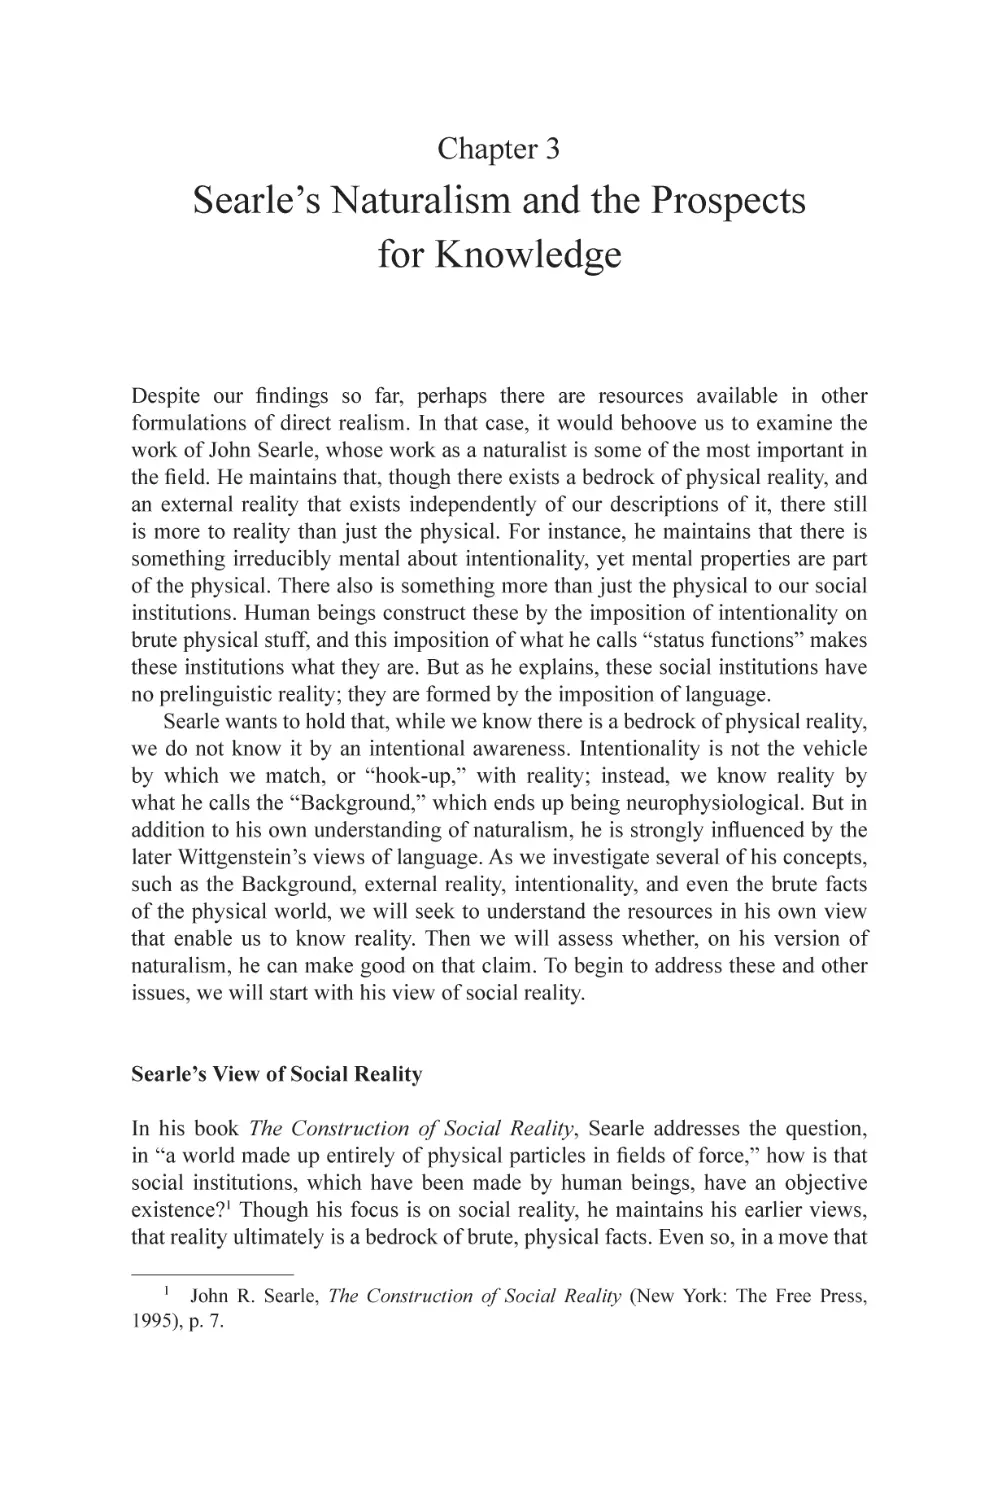 3 Searle’s Naturalism and the Prospects for Knowledge